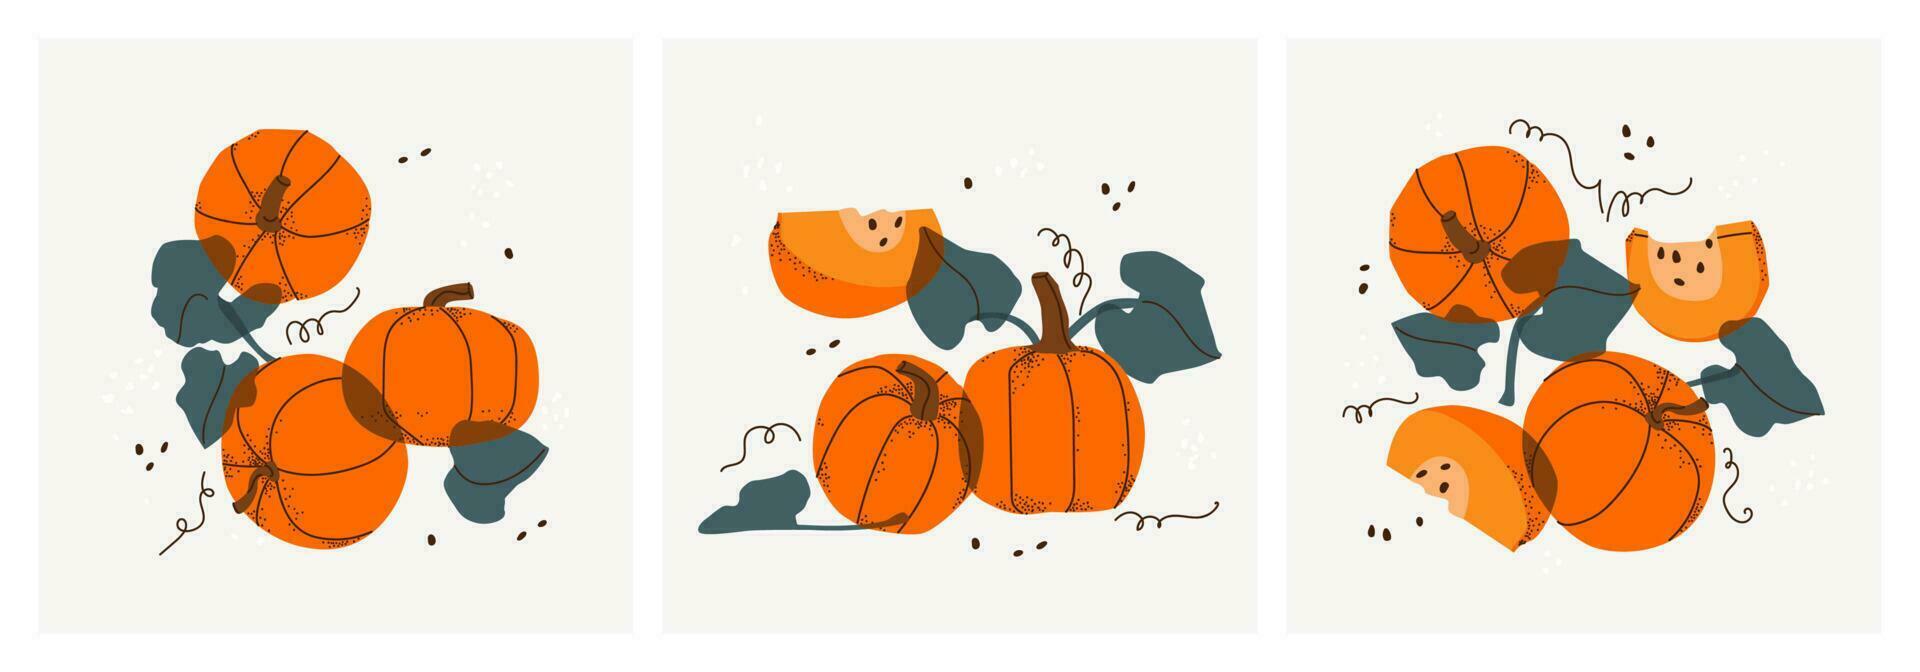 Set of decorative still lifes with bright orange pumpkins. Hand drawing slices, twigs and leaves, vegetable fruits. Ideal for print, posters, postcards, design creation. Vector trendy triptych.